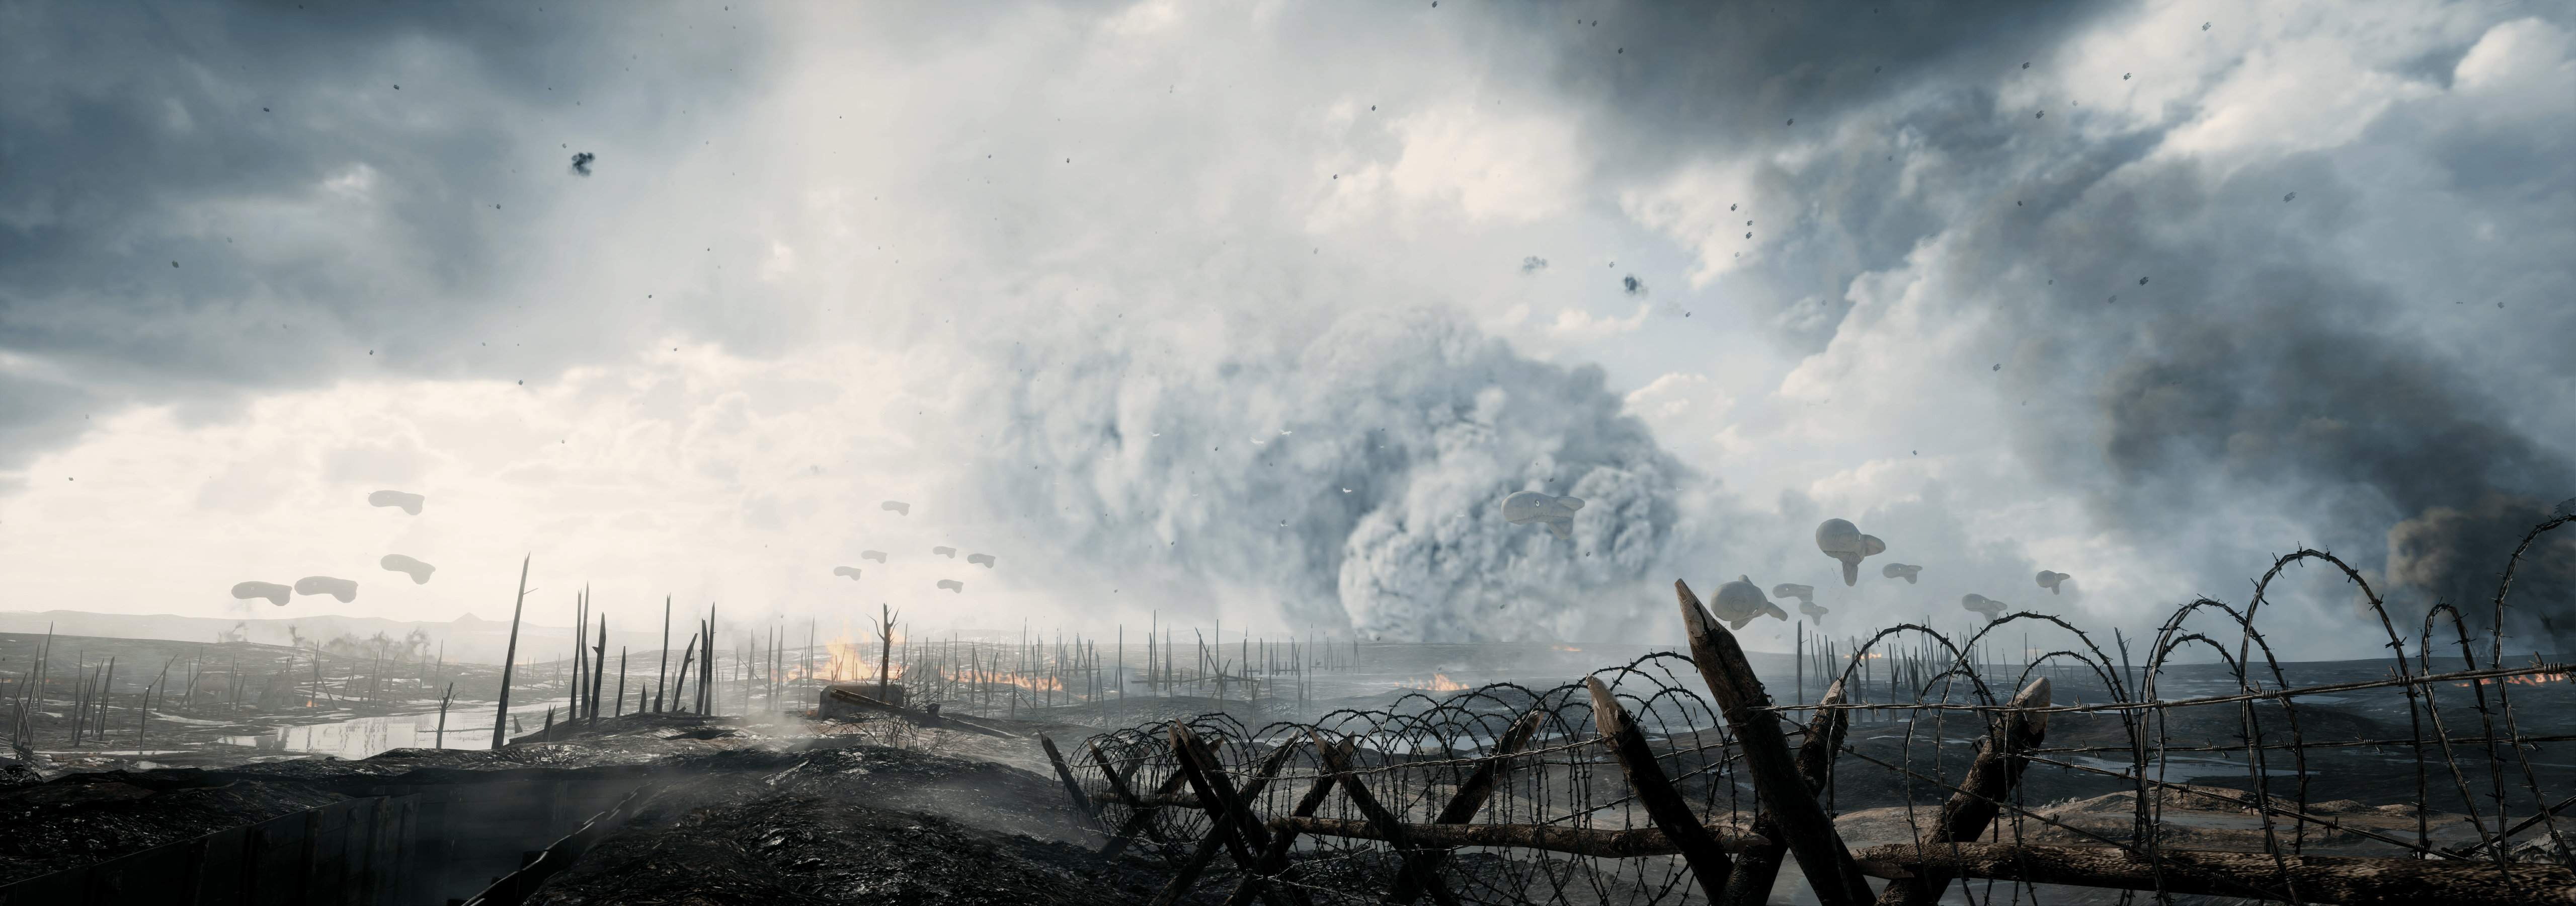 Battlefield 1 Full HD Wallpaper and Background Imagex1800